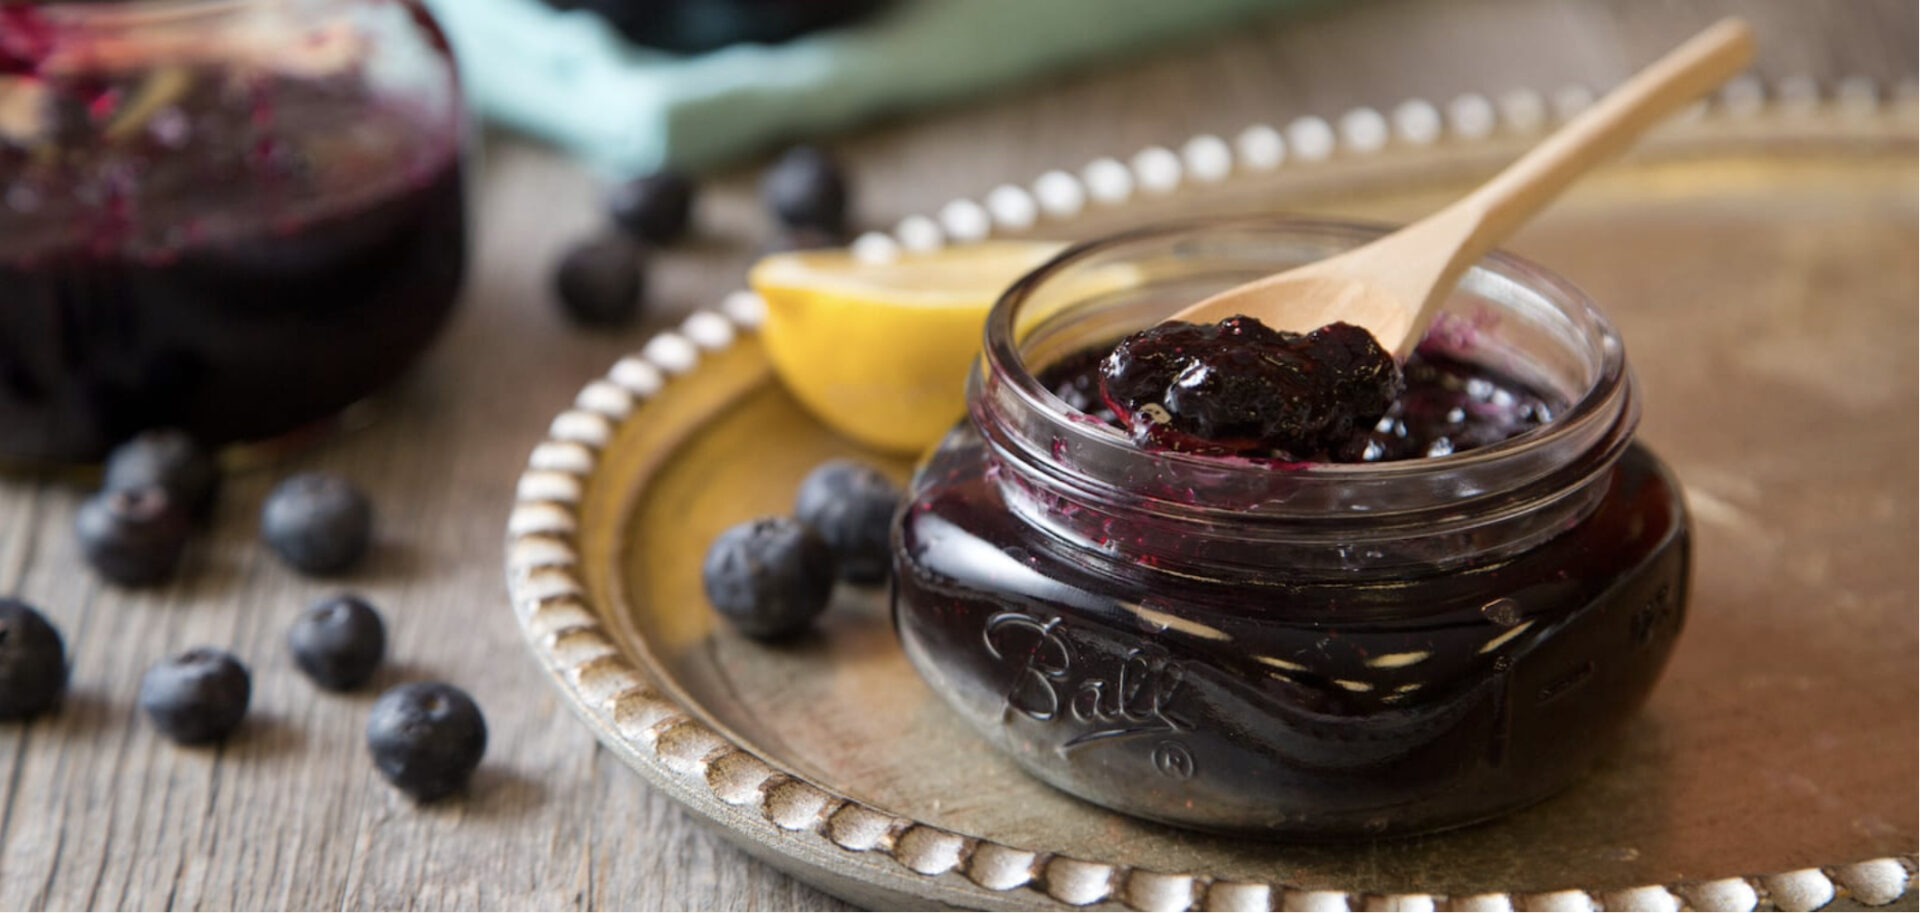 Homemade Blueberry Jam in a glass jar with lemons and blueberries around it